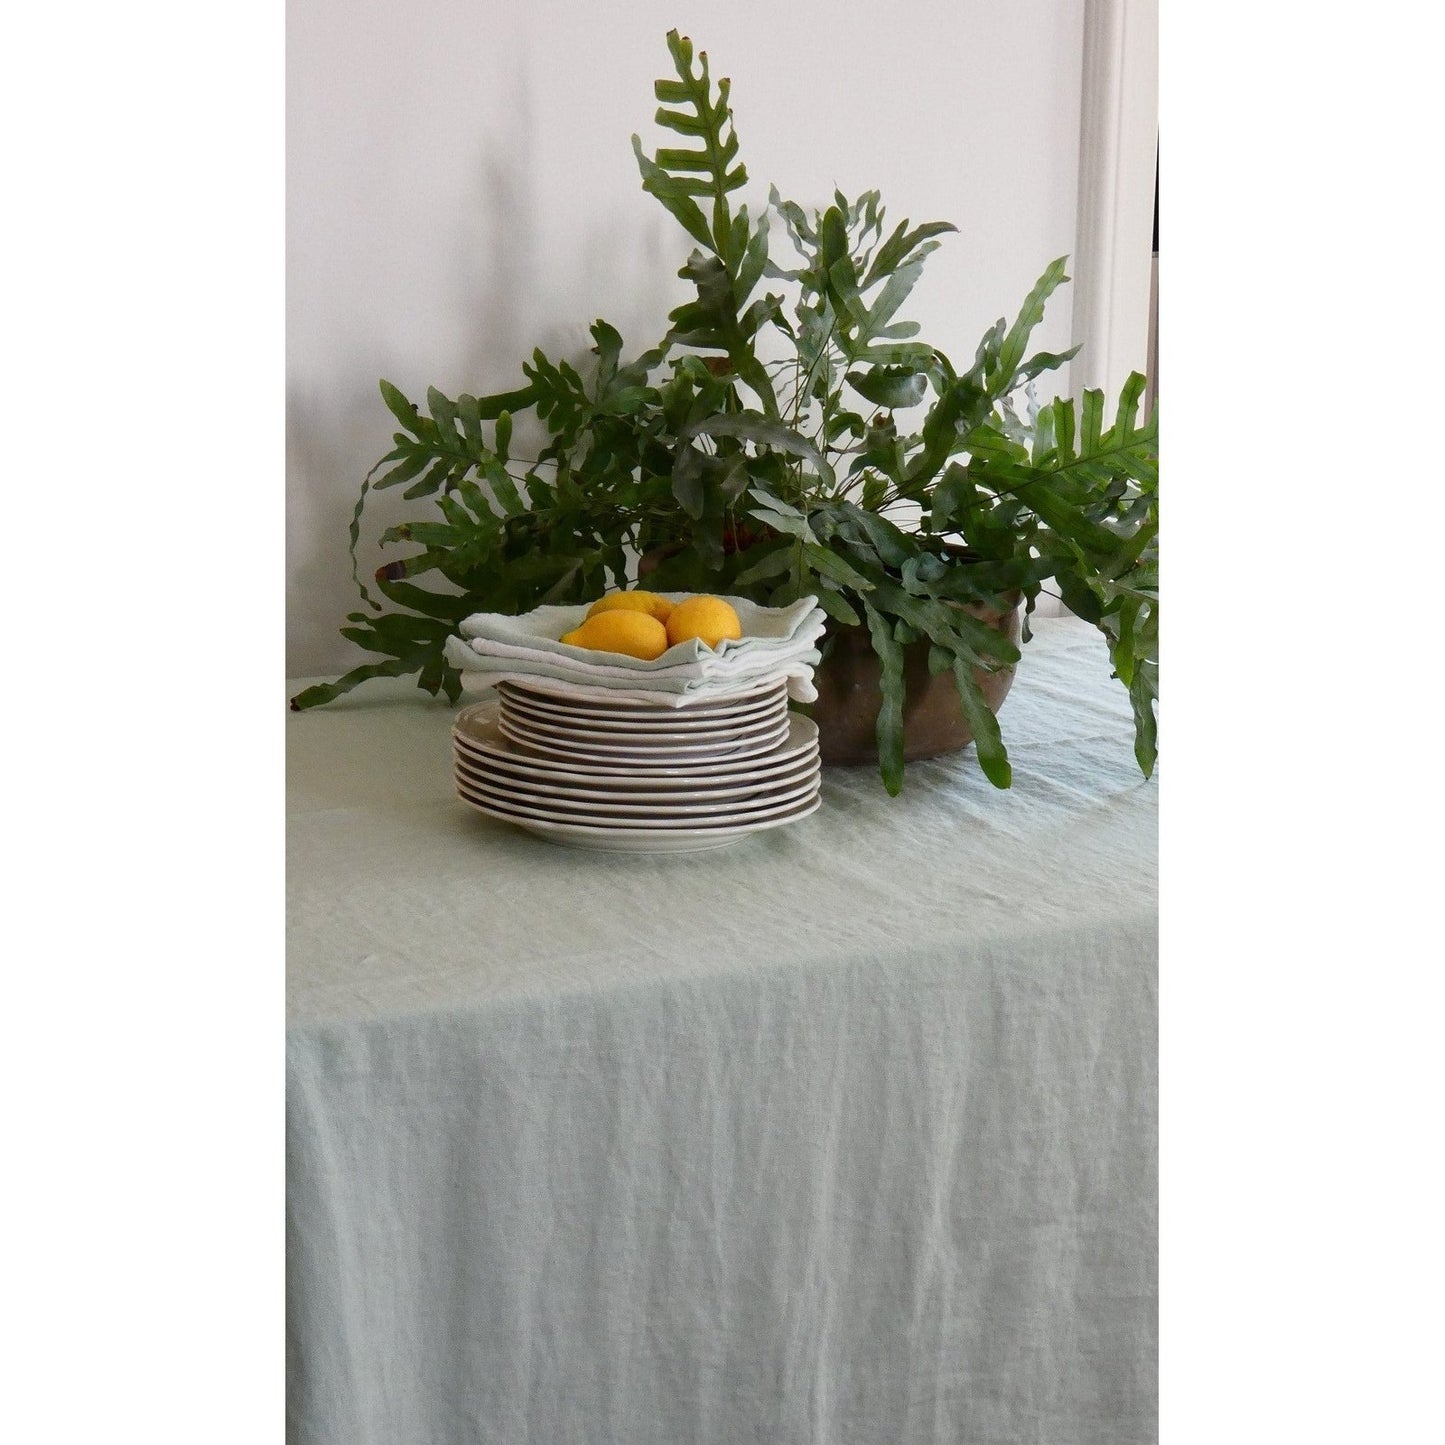 Emma washed linen table cloth - available in 5 colors